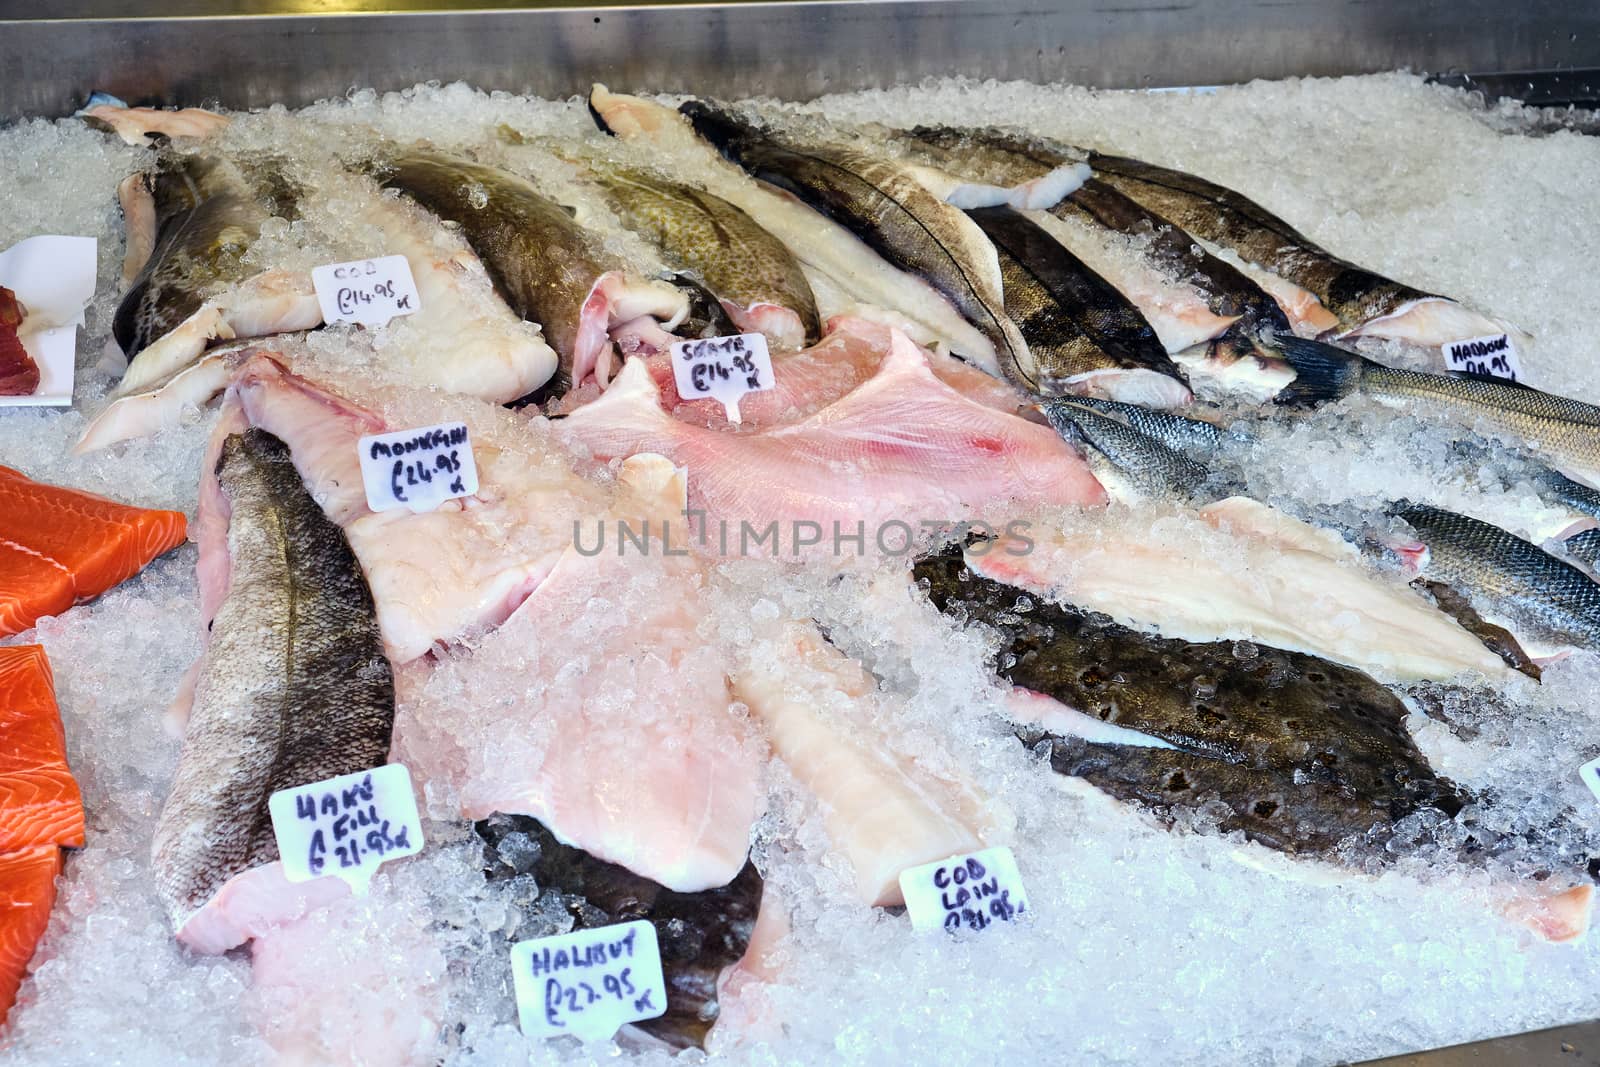 Cod, hake, halibut and other fish for sale at a market